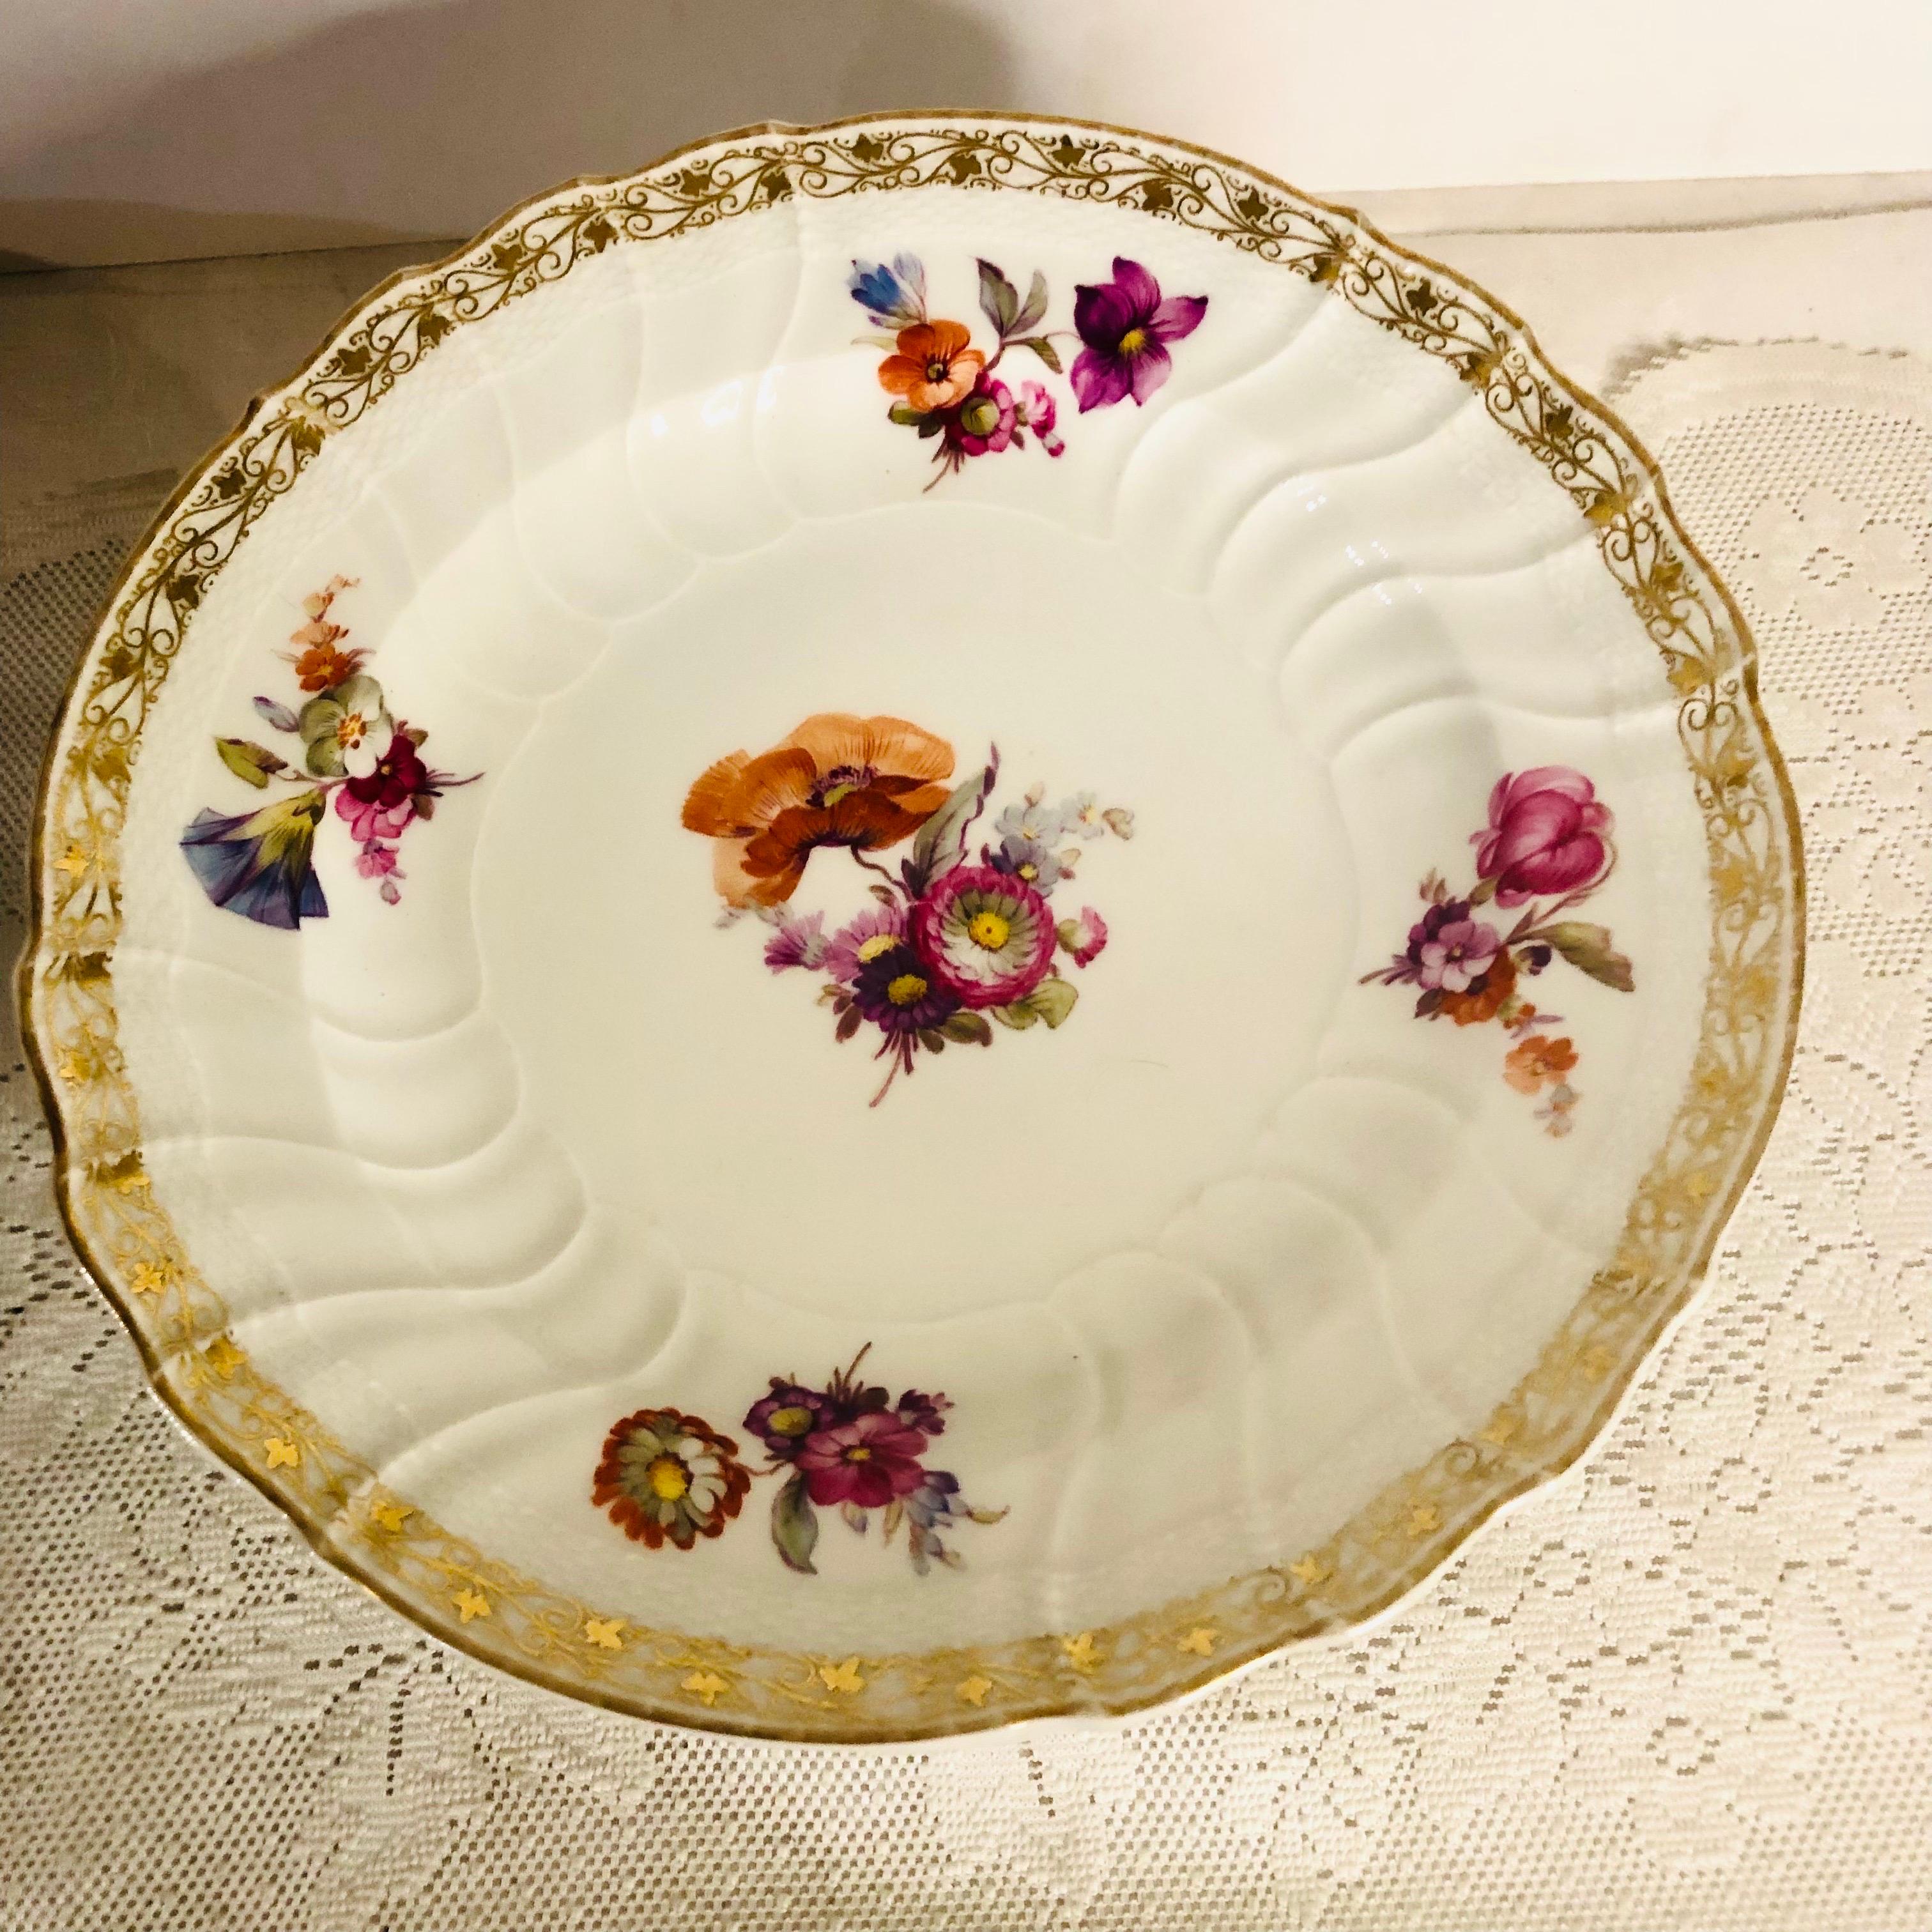 12 KPM Dinner Plates, Each Hand-Painted with a Different Central Flower Bouquet For Sale 7